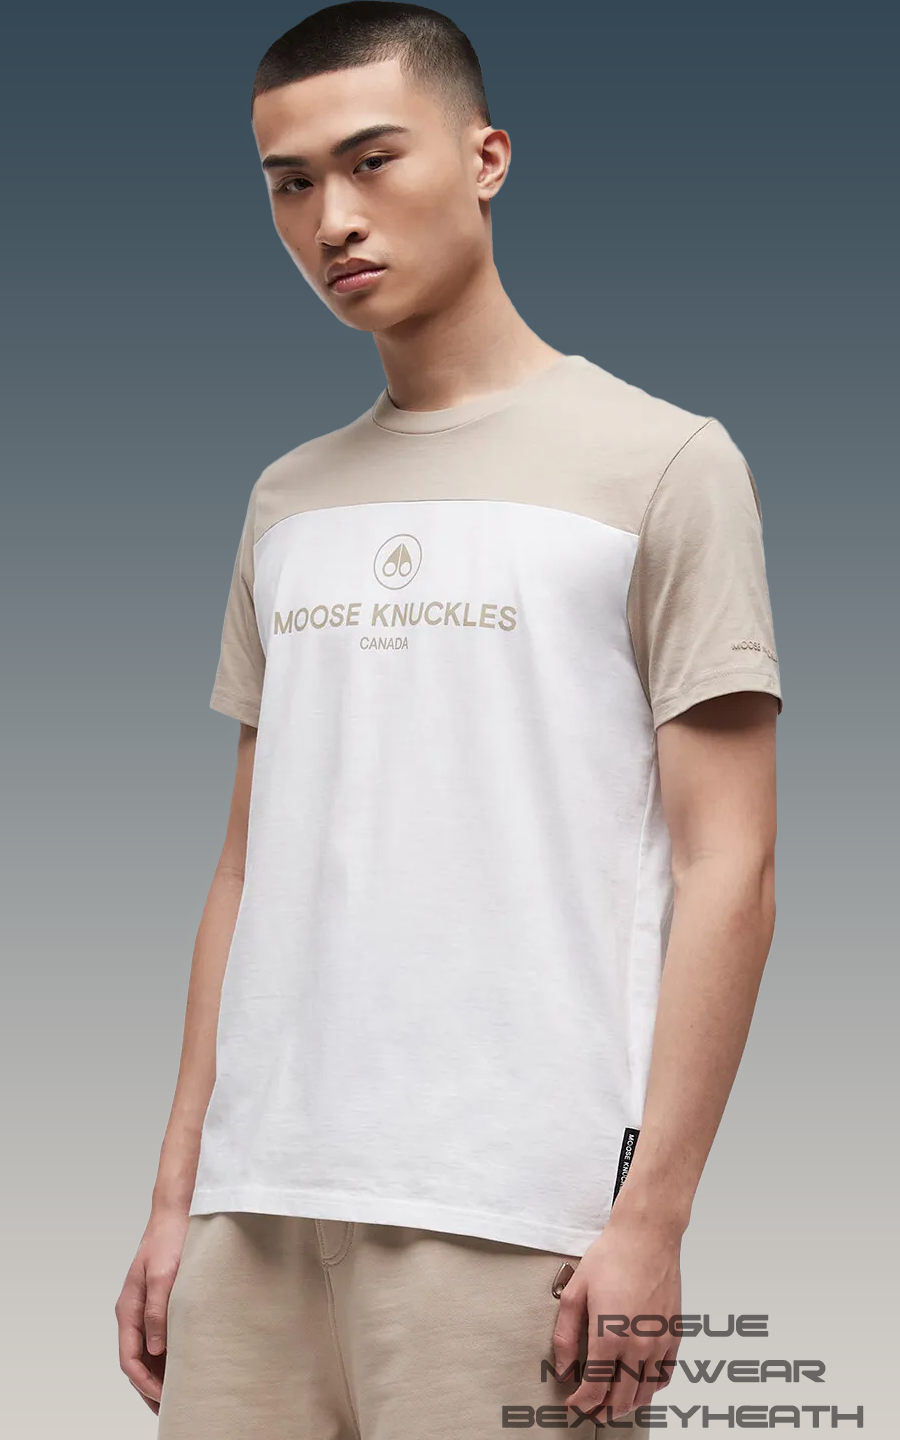 Moose Knuckles Ormond T-Shirt In White - Rogue Menswear